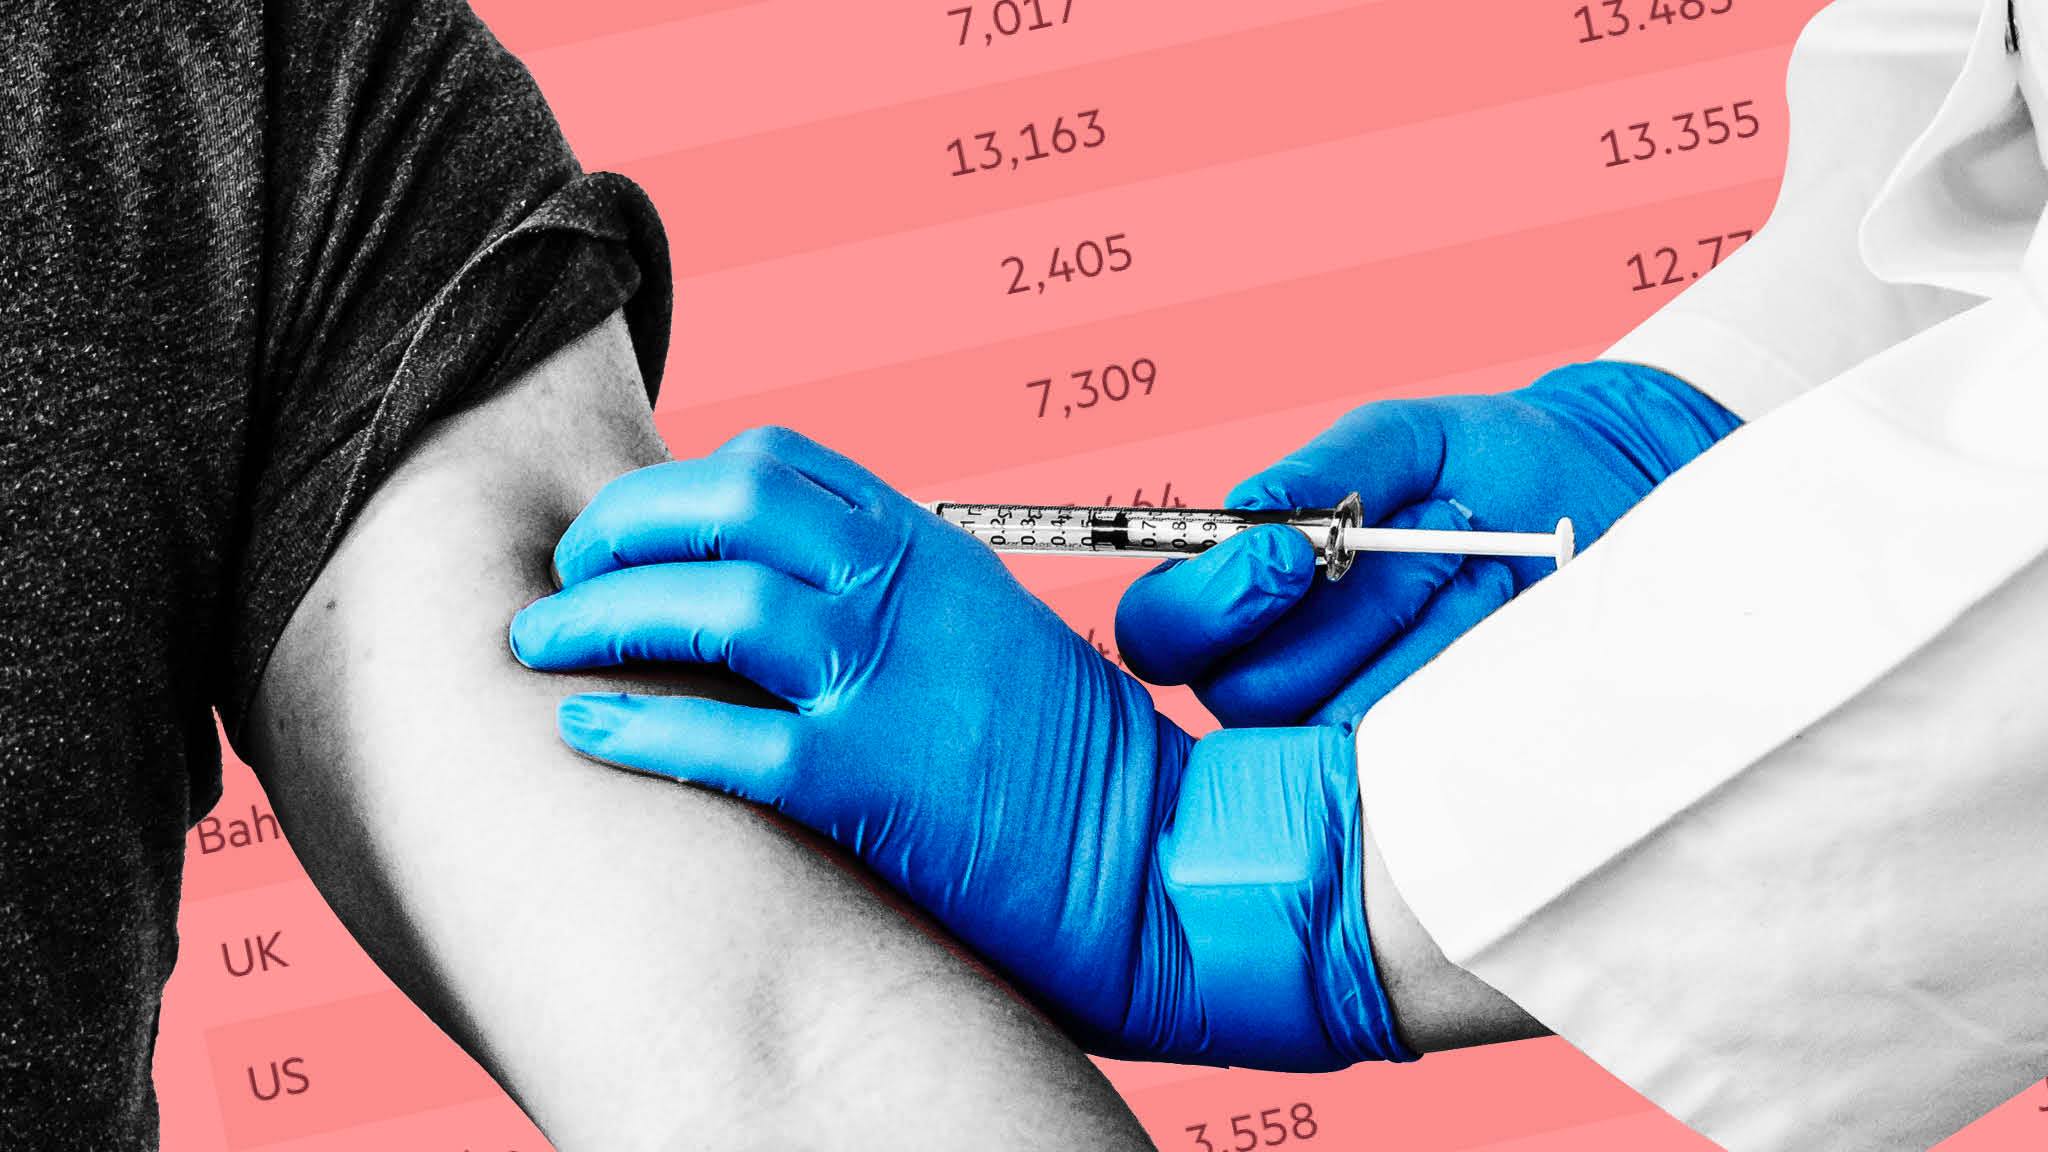 Covid-19 vaccine tracker: the global race to vaccinate